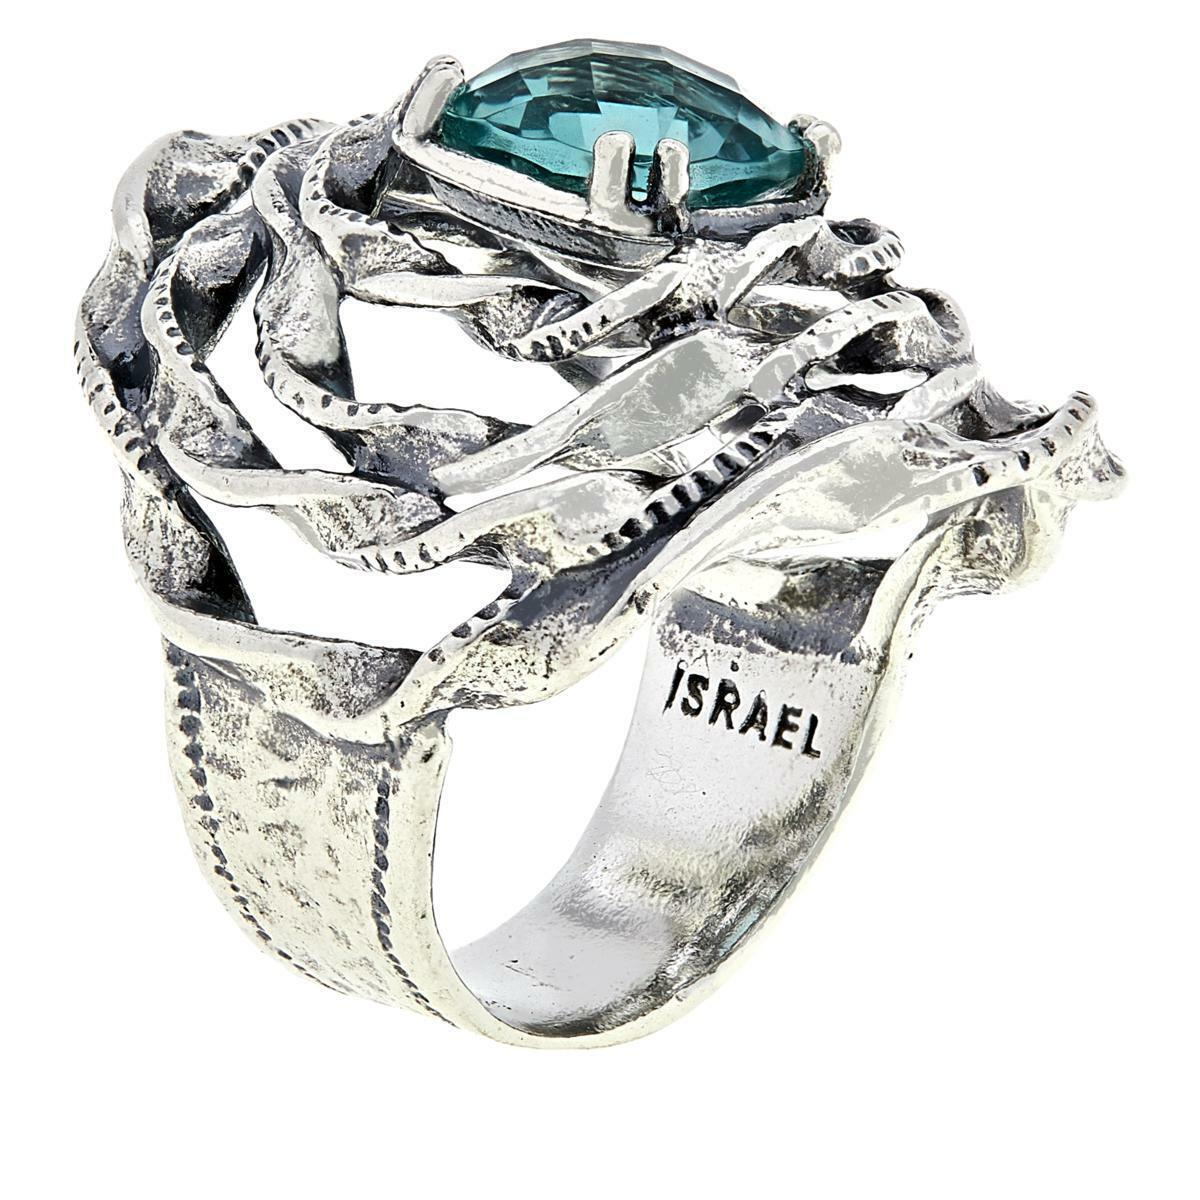 LiPaz Floral Sterling Silver Fluorite Ring, Size 5 - HSN $75